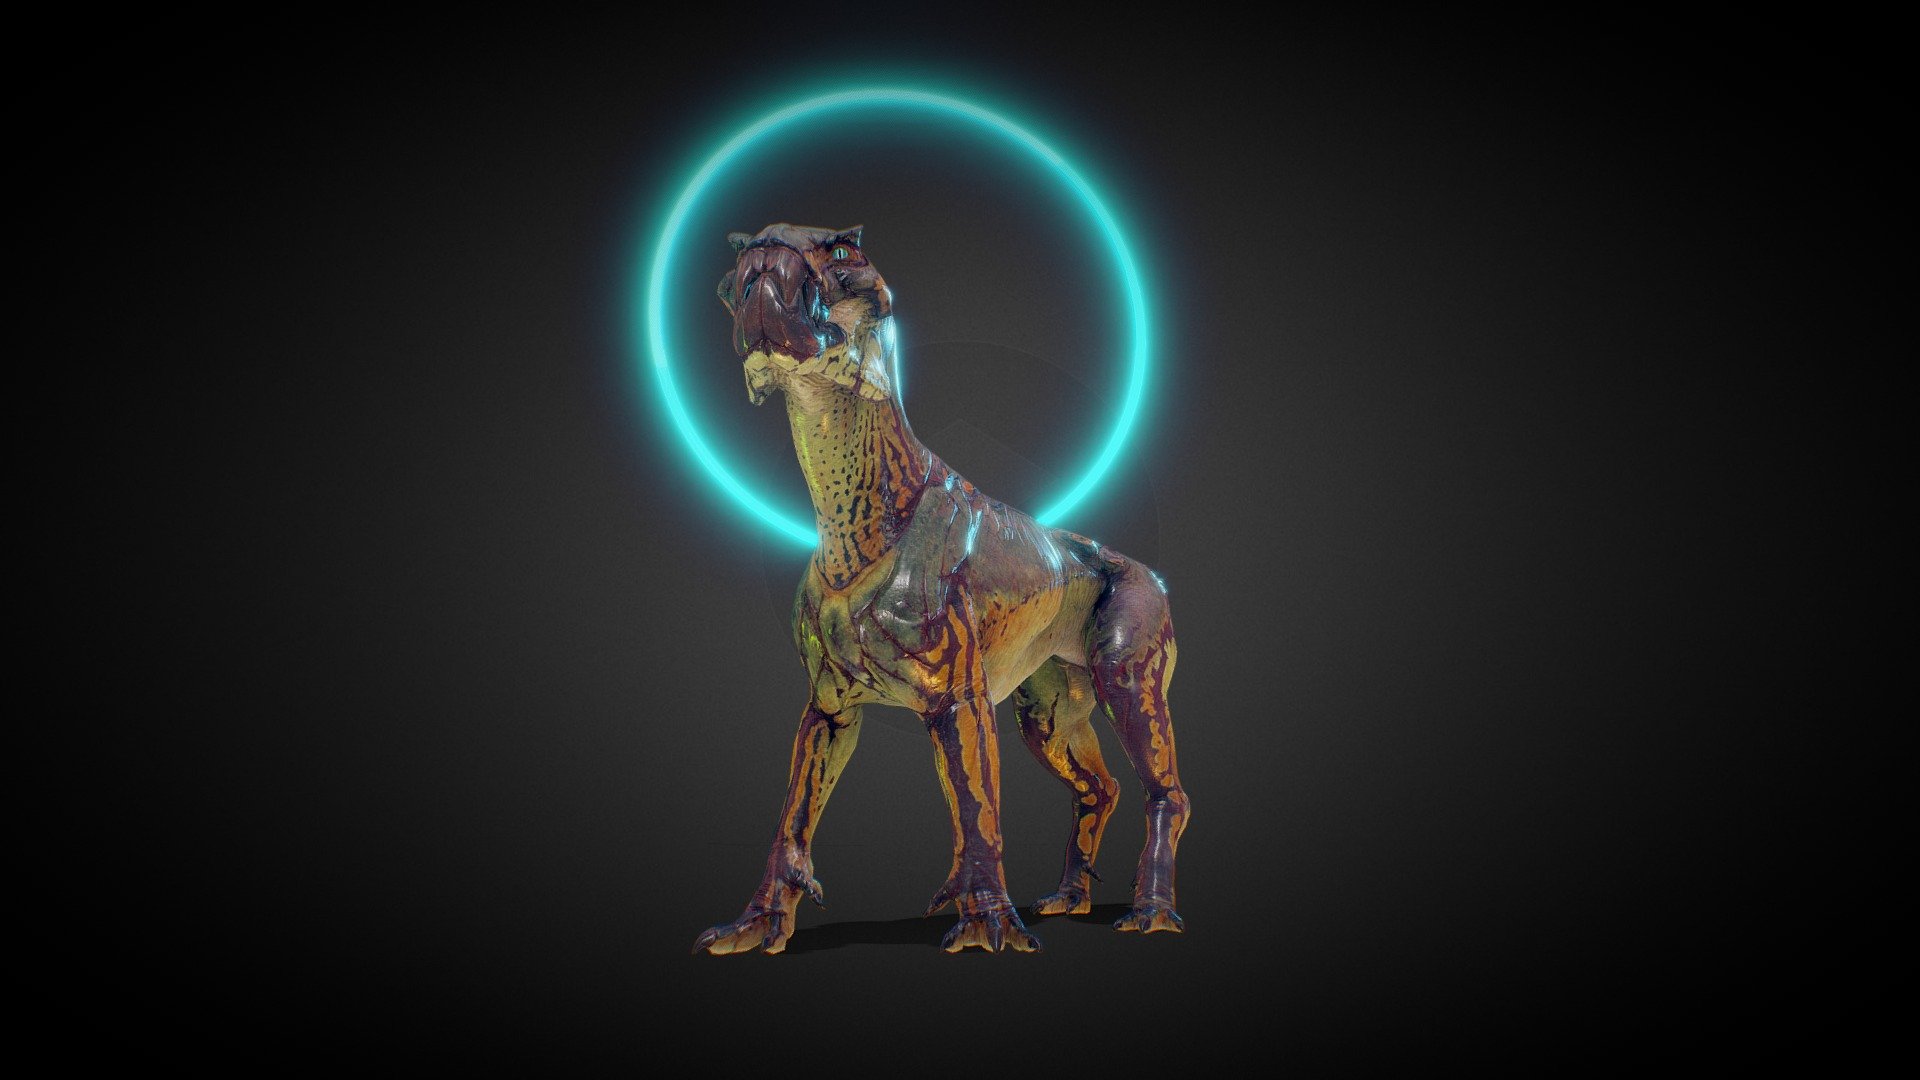 Alien-Dog Animated ready for games.
30 animations included 3d model